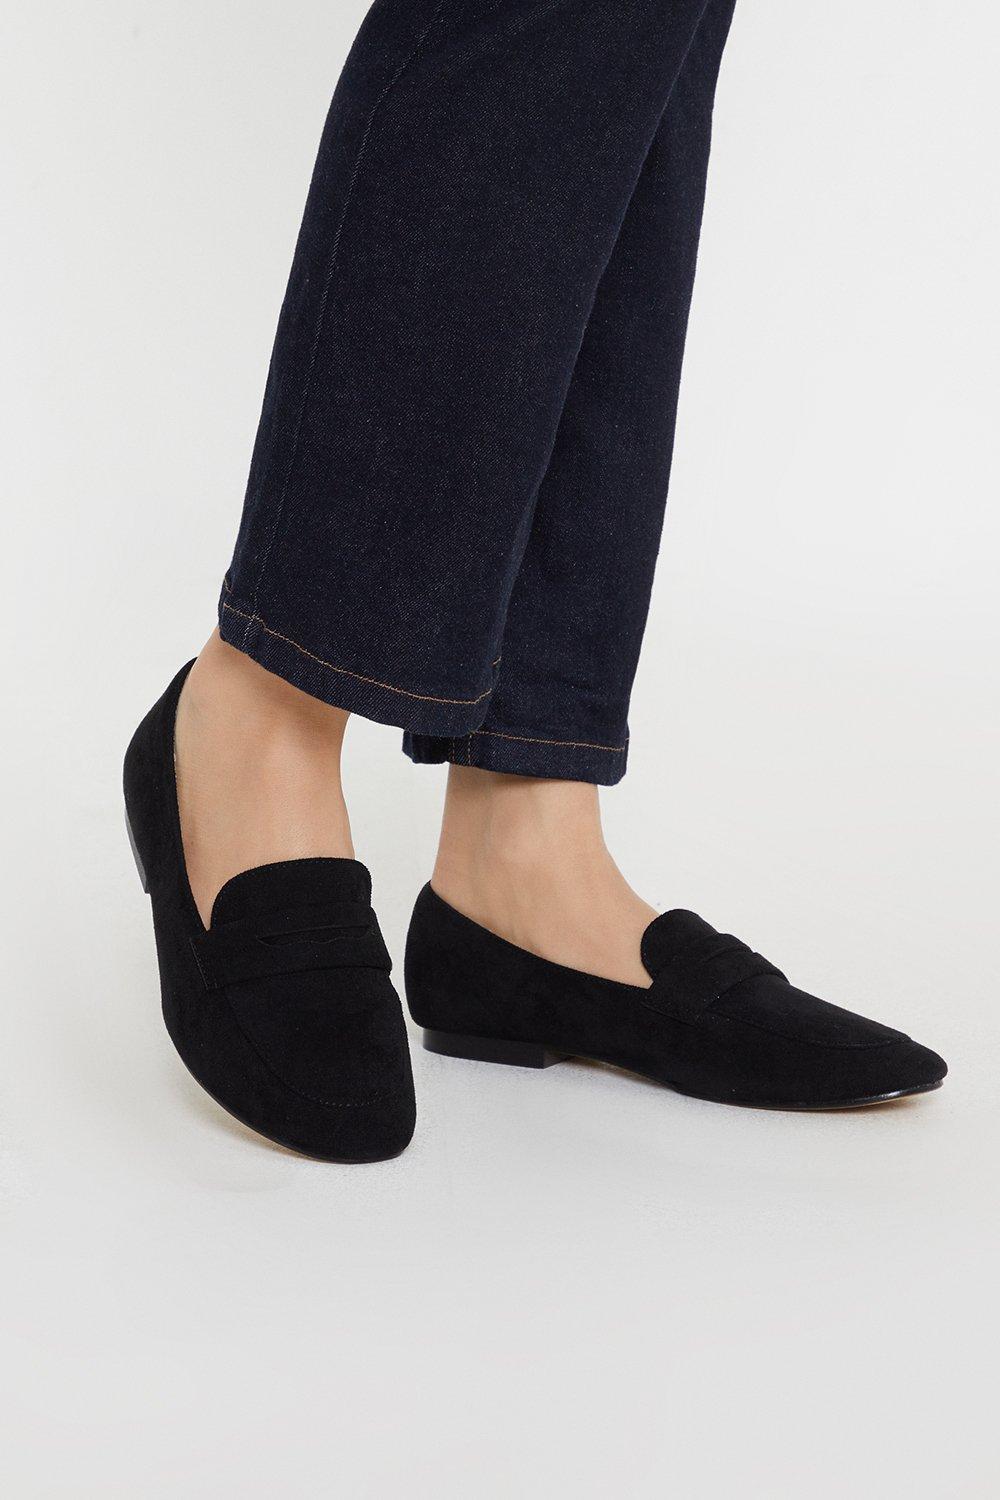 Women’s Leah Round Toe Penny Loafers - natural black - 5